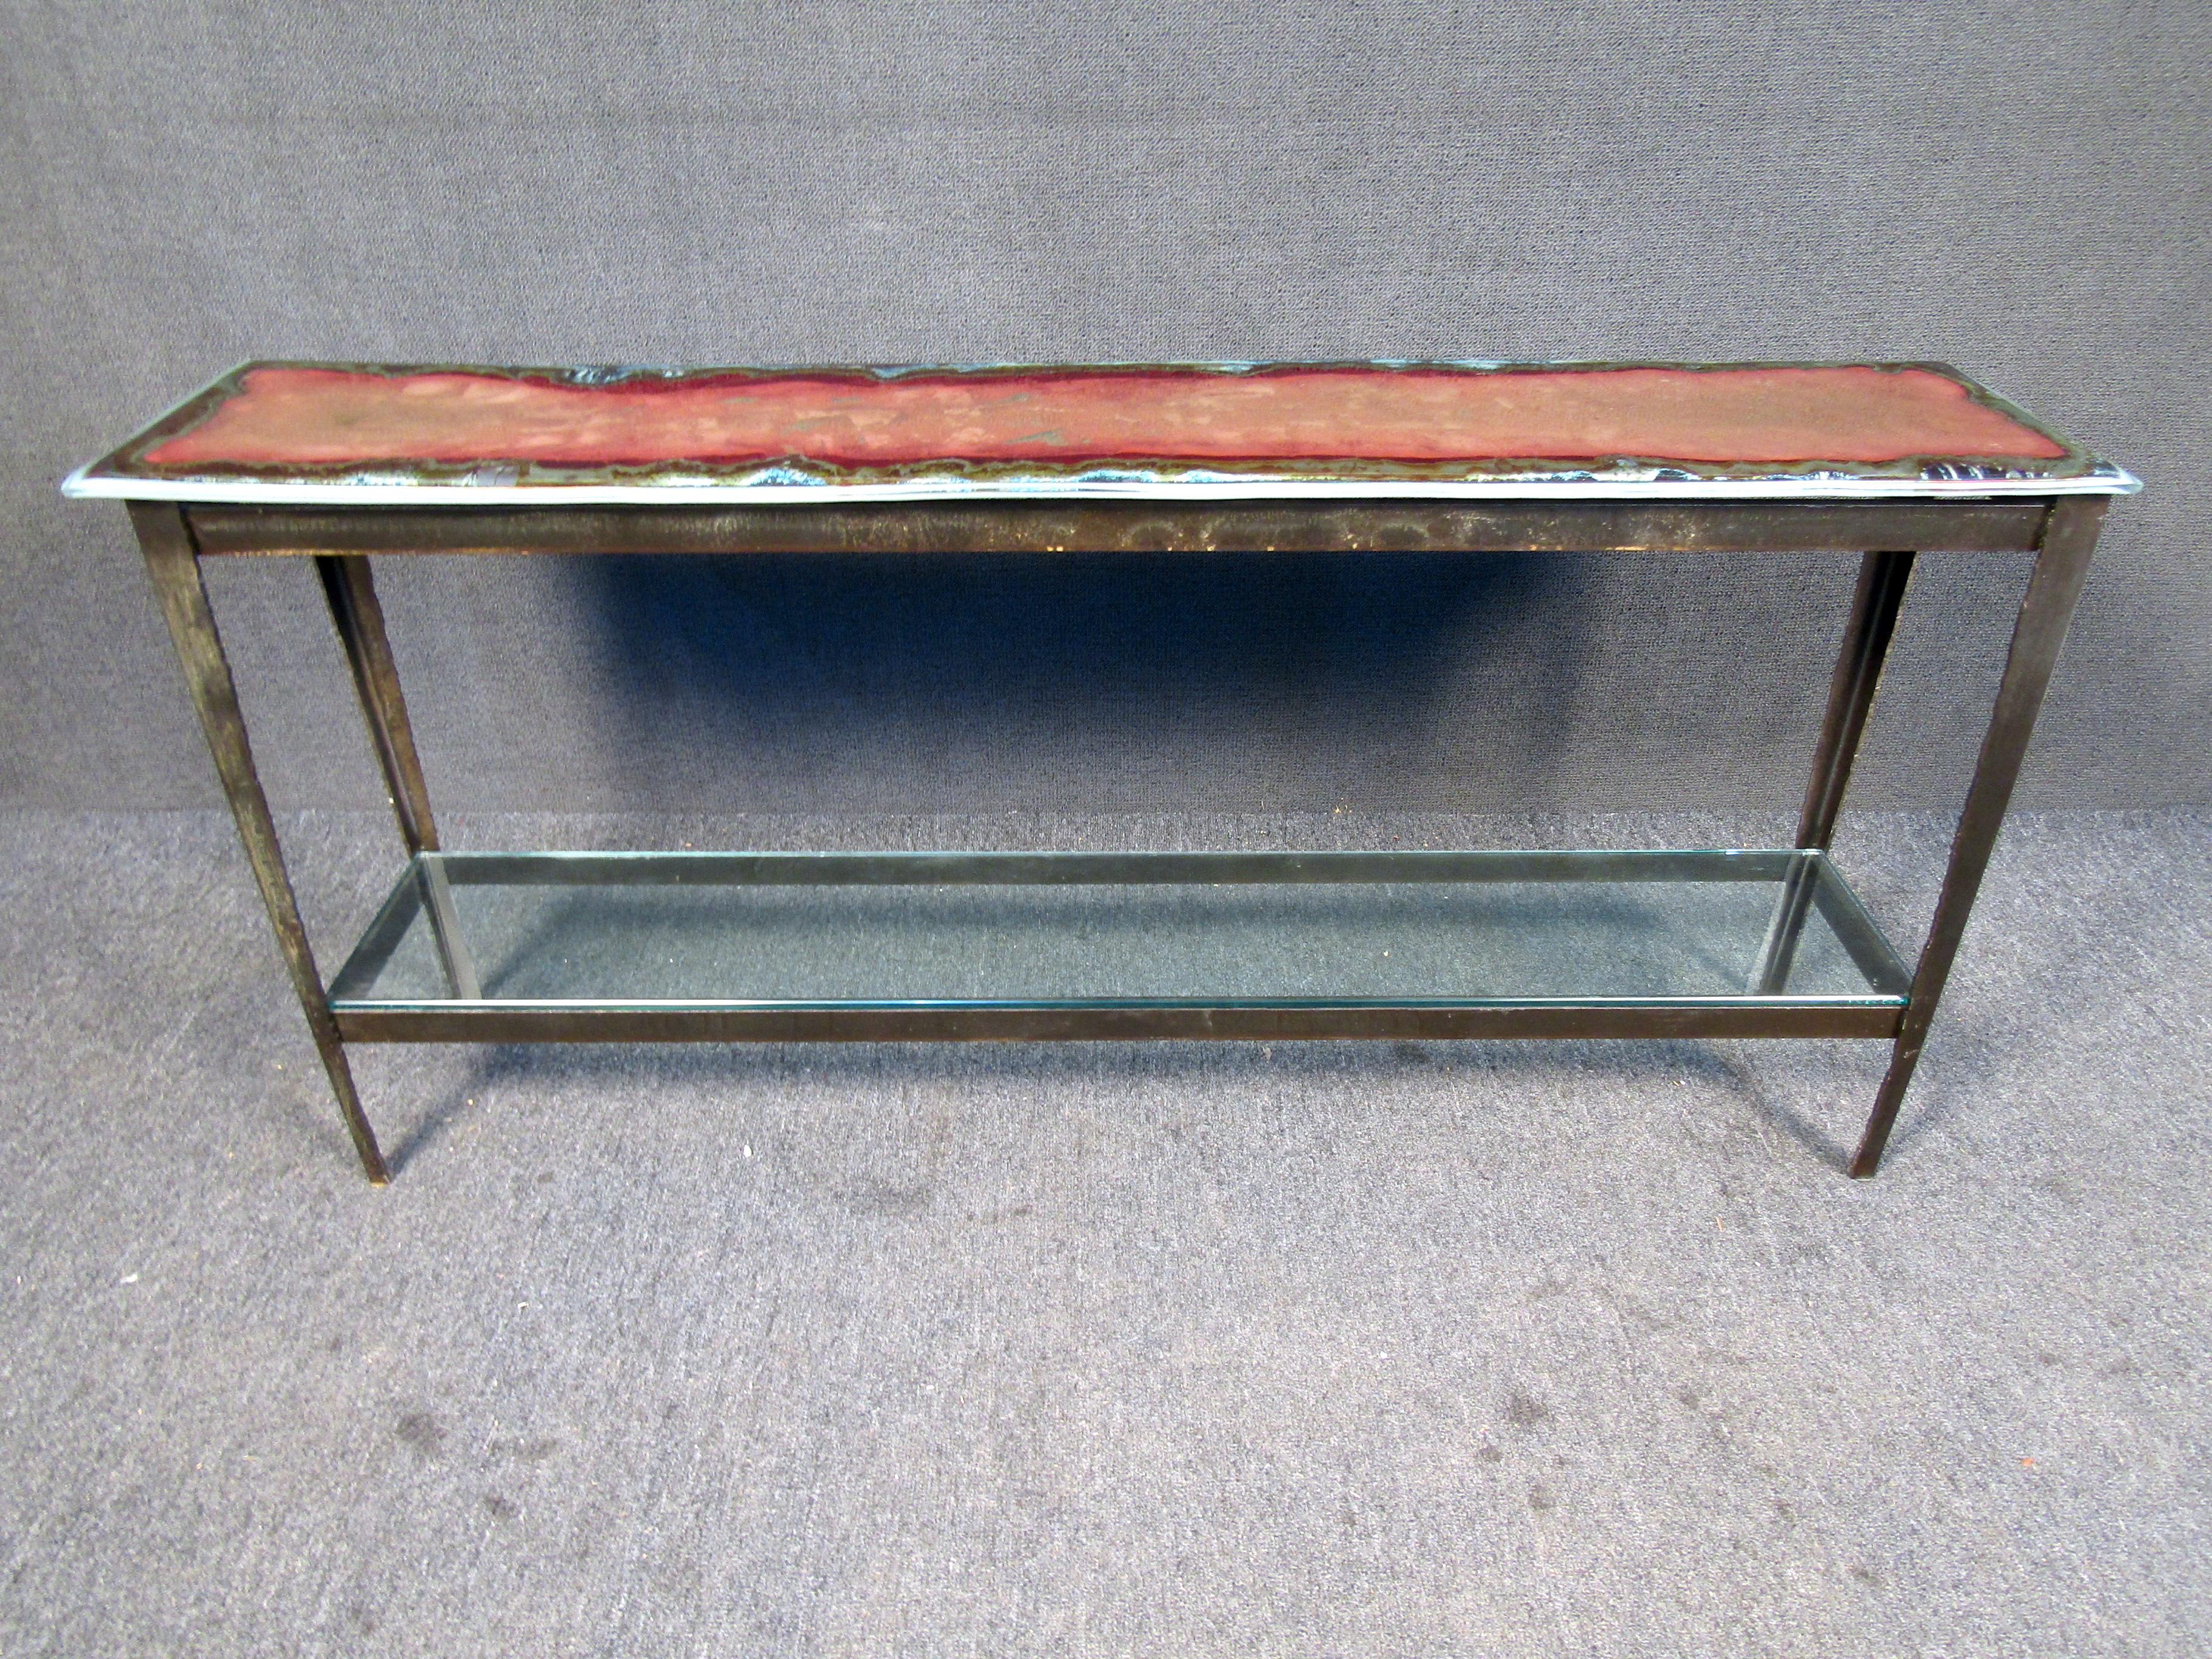 This unique blown glass coffee table comes with a sturdy metal base and vibrant multi-color glass top sure to capture your guests attention. 
Please confirm item location (NJ or NY).